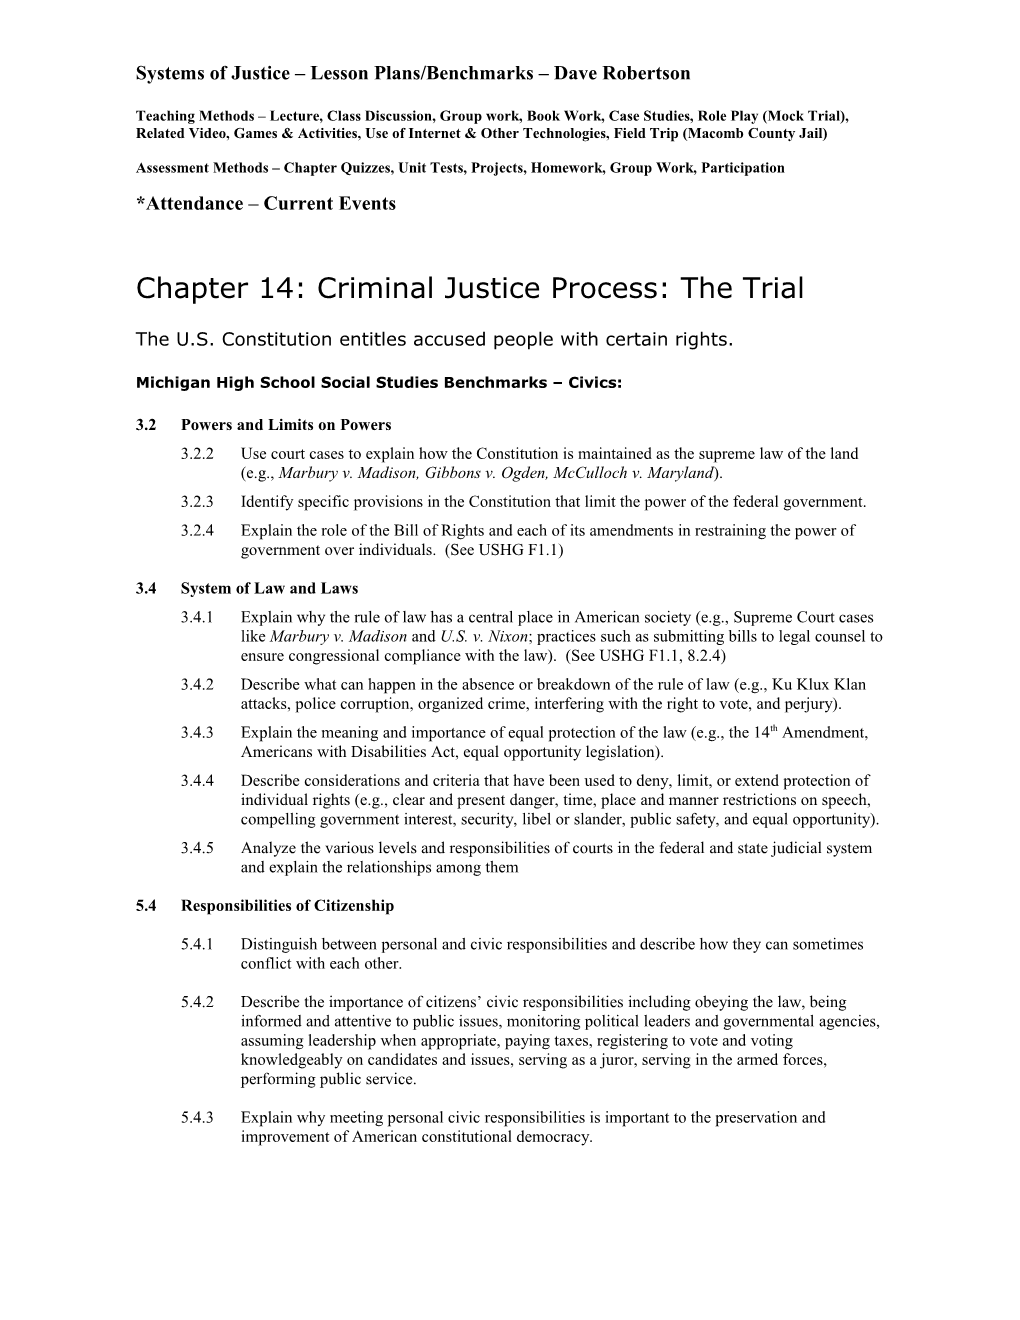 Systems of Justice Lesson Plans/Benchmarks Dave Robertson